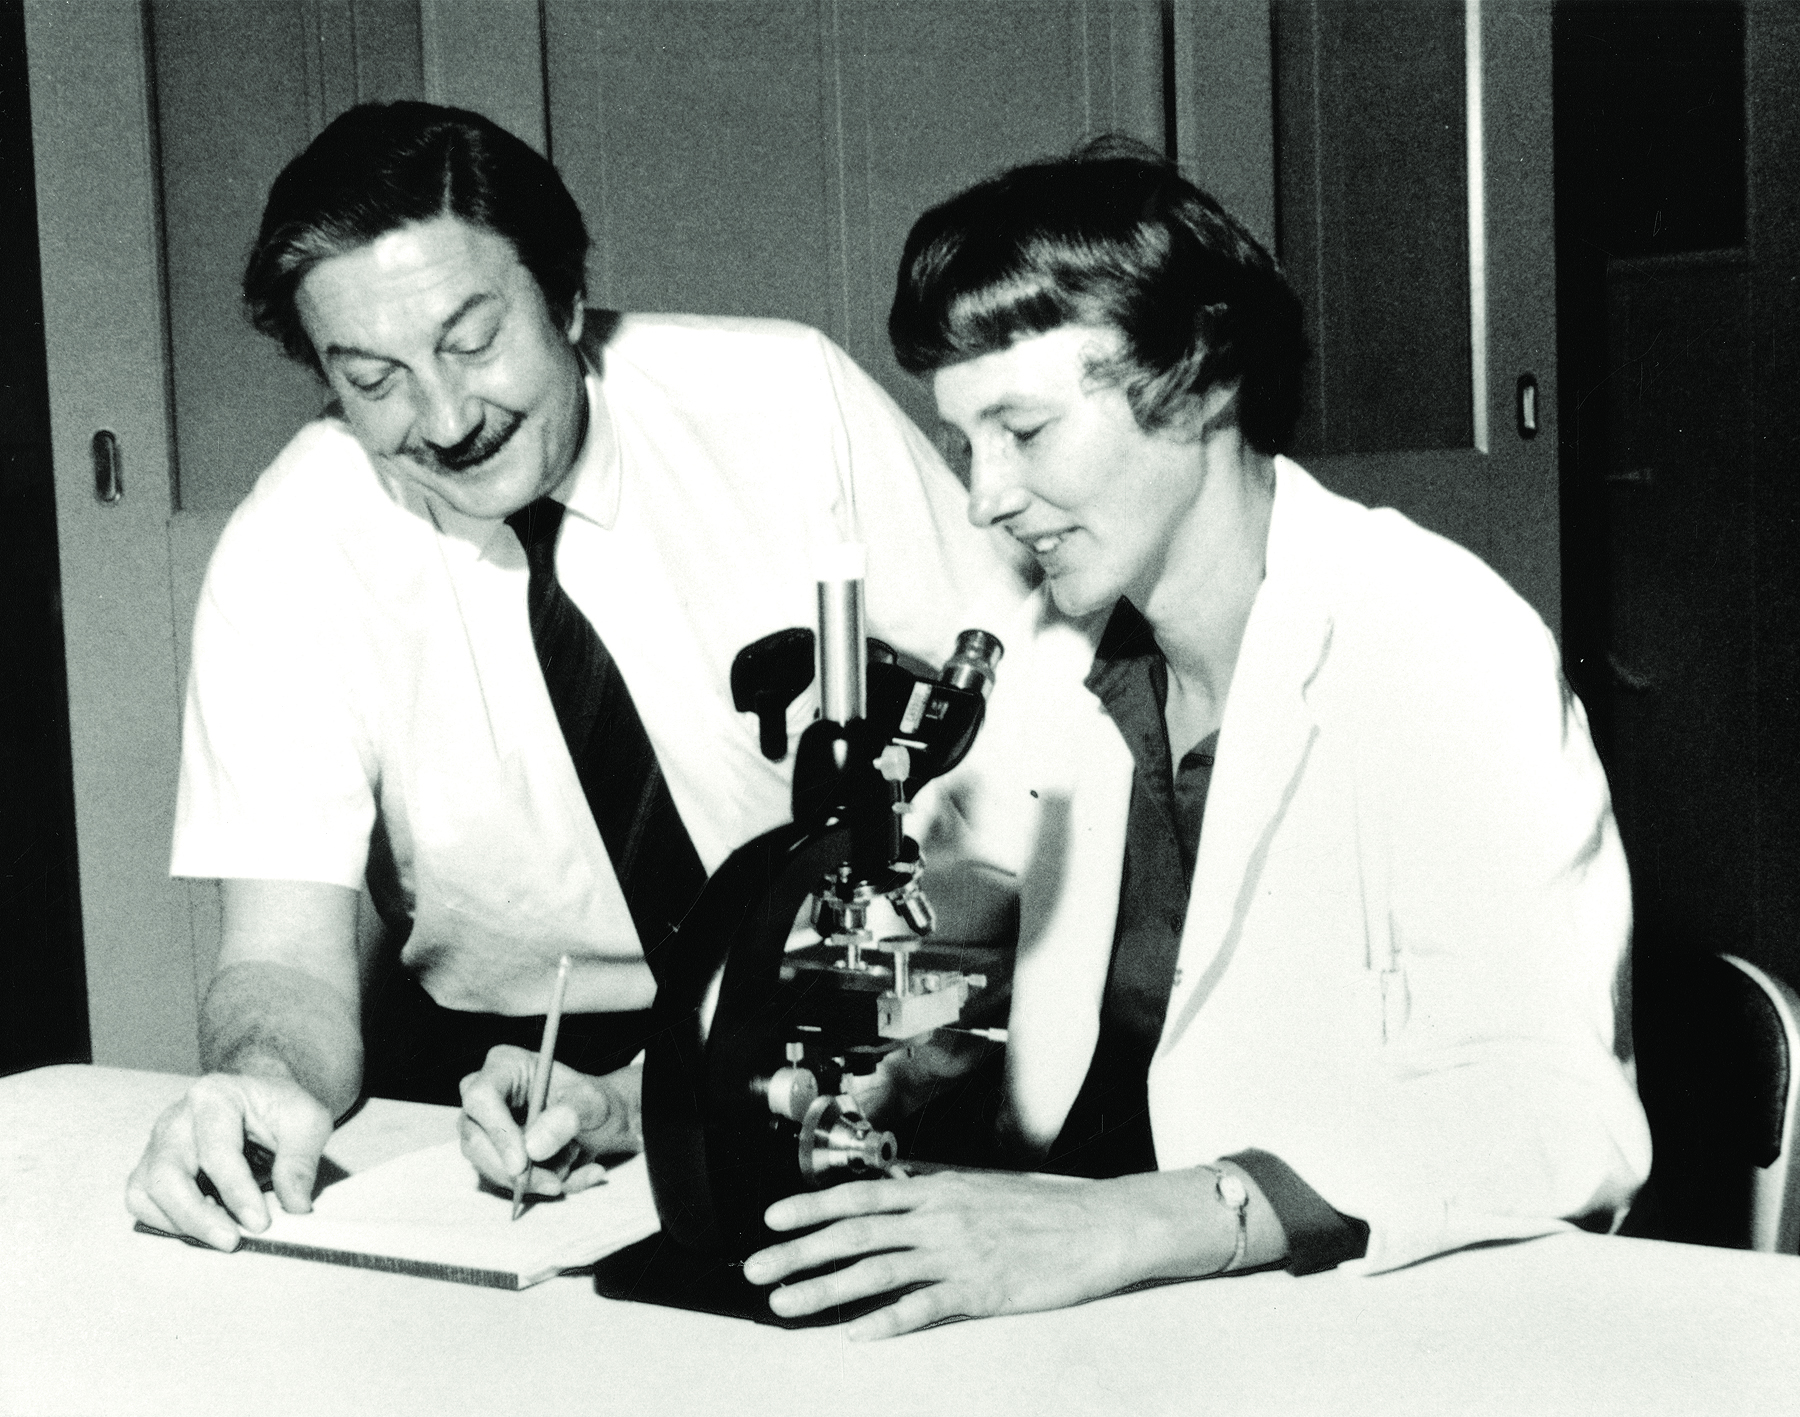  black and white photo Bob Hubner with Janet Hartley working at a microscope at the NIH in 1960.